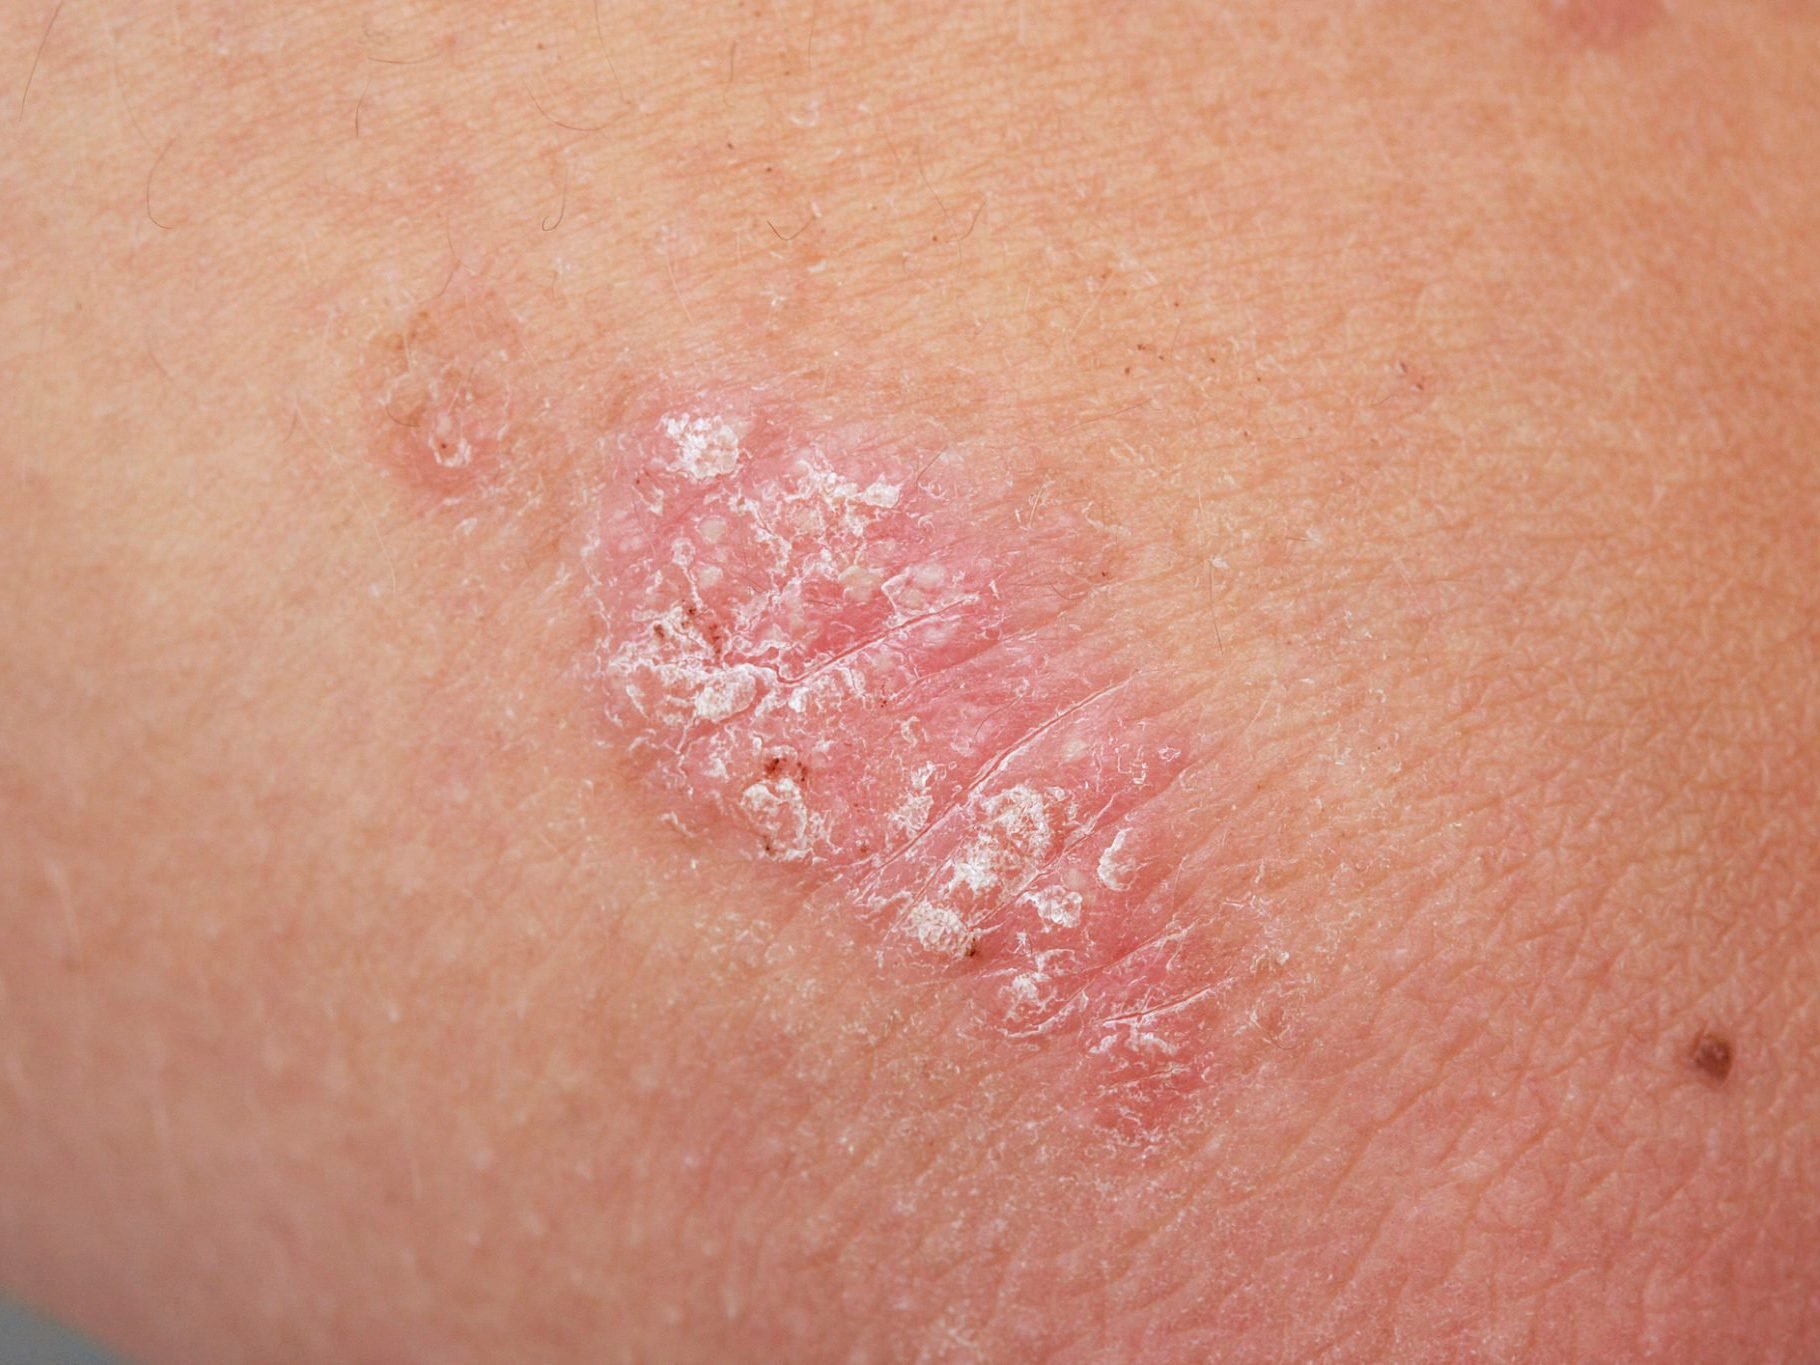 How to Tell the Difference Between Psoriasis, Rosacea, and Eczema - psoriasis on skin